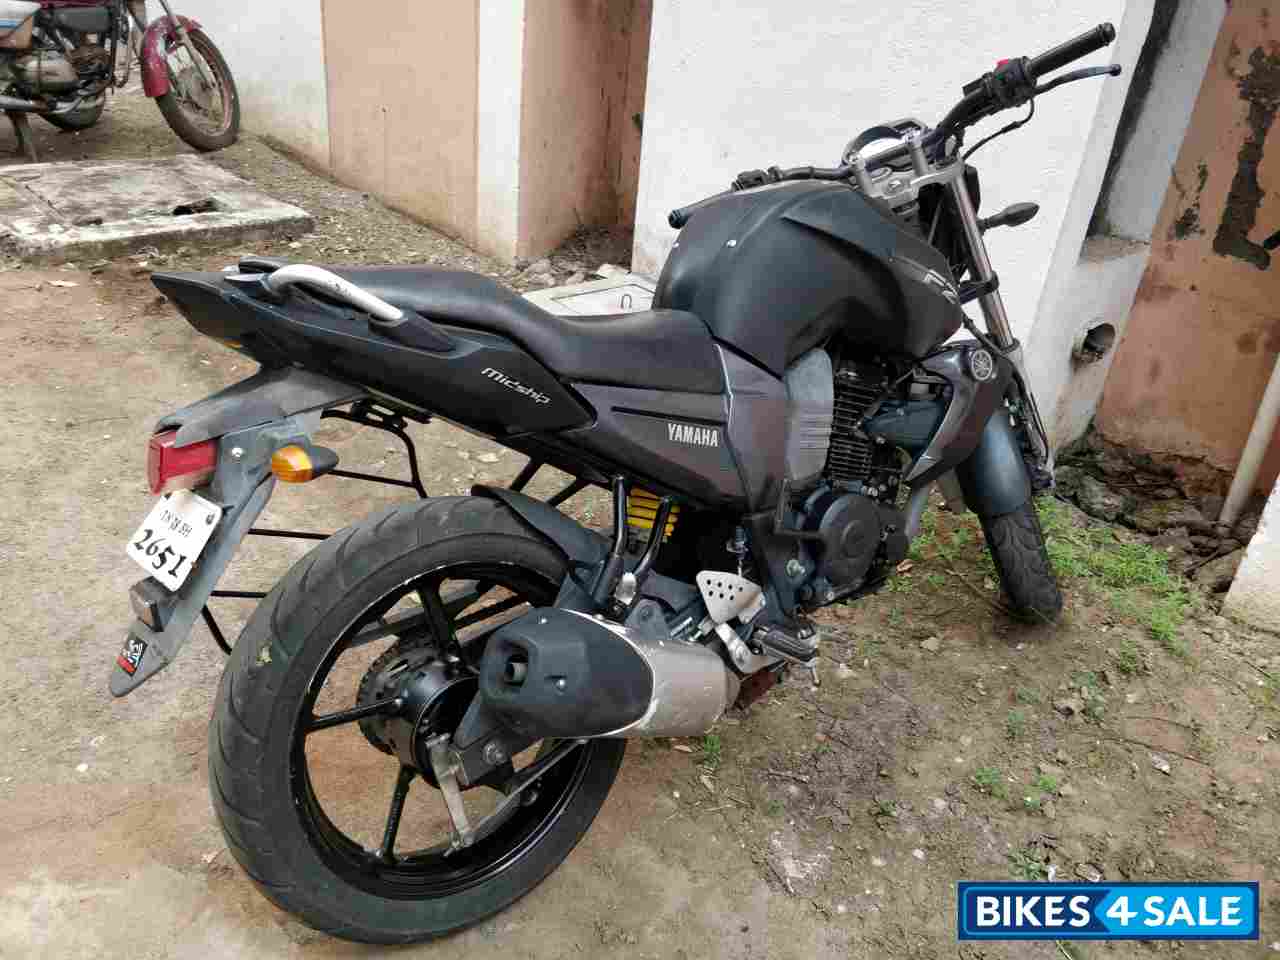 Used 2010 model Yamaha FZ16 for sale in Coimbatore. ID 258838. Black ...